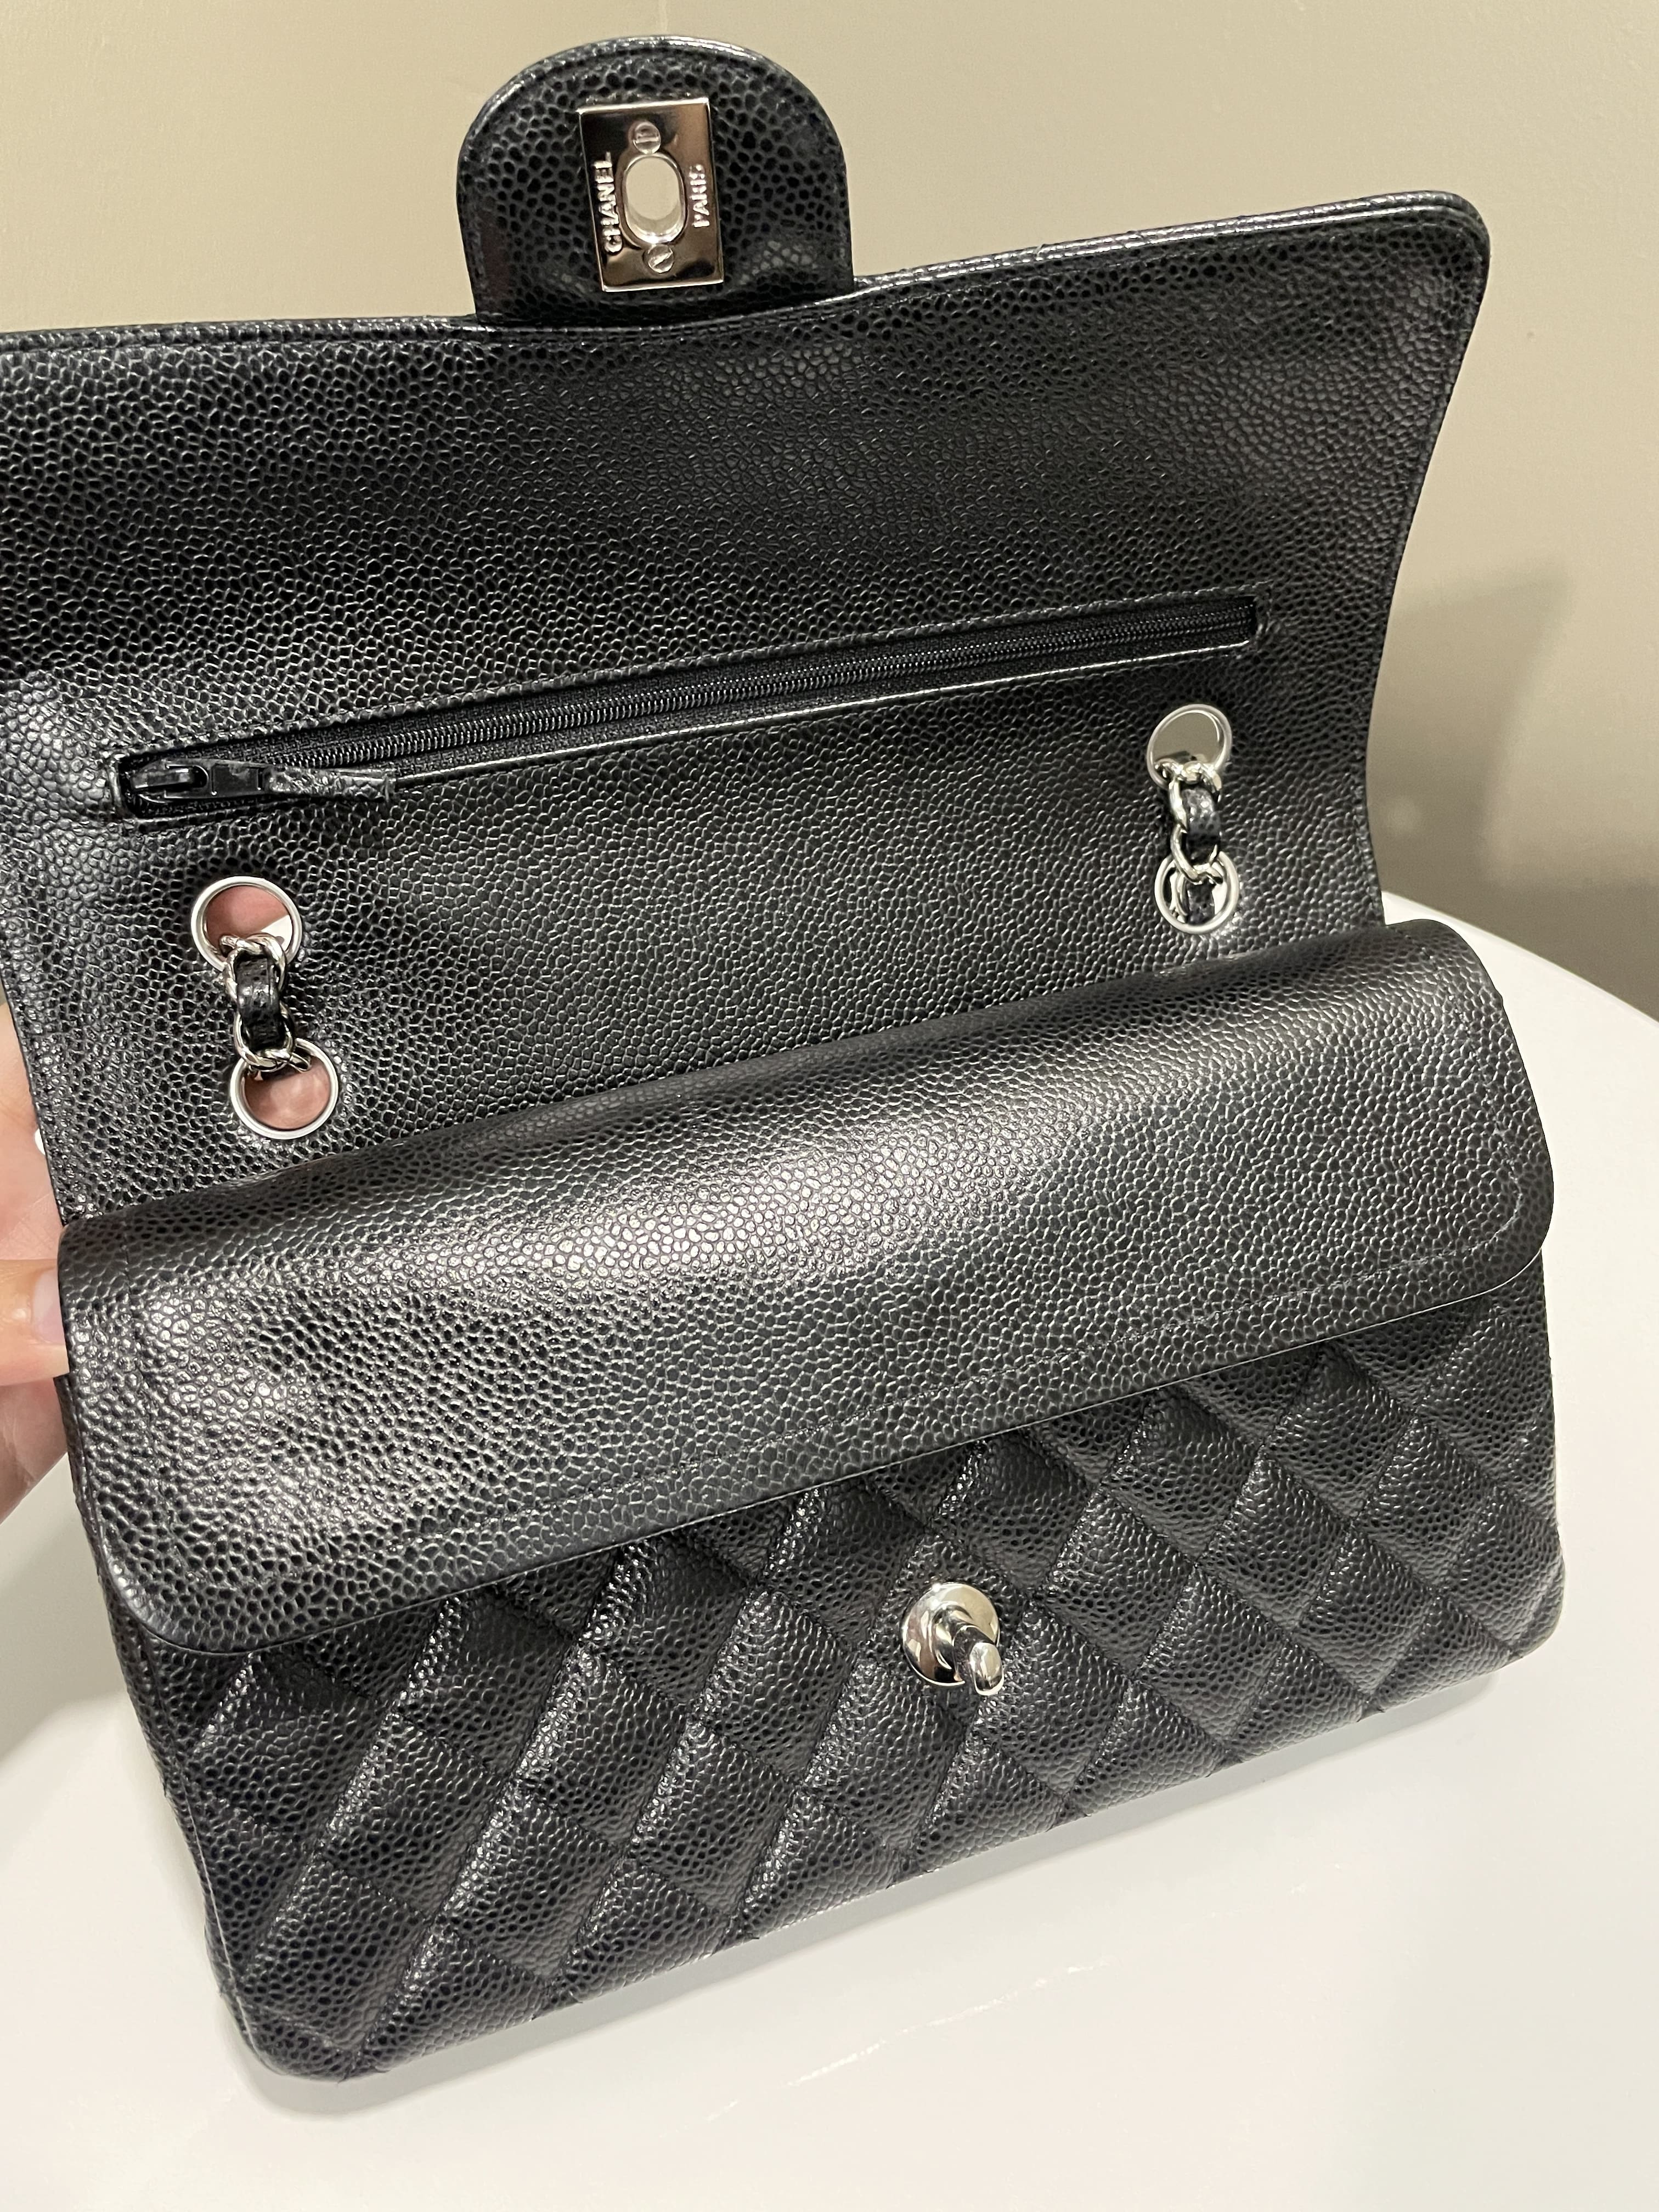 Chanel Classic Quilted Medium Double Flap
Black Caviar